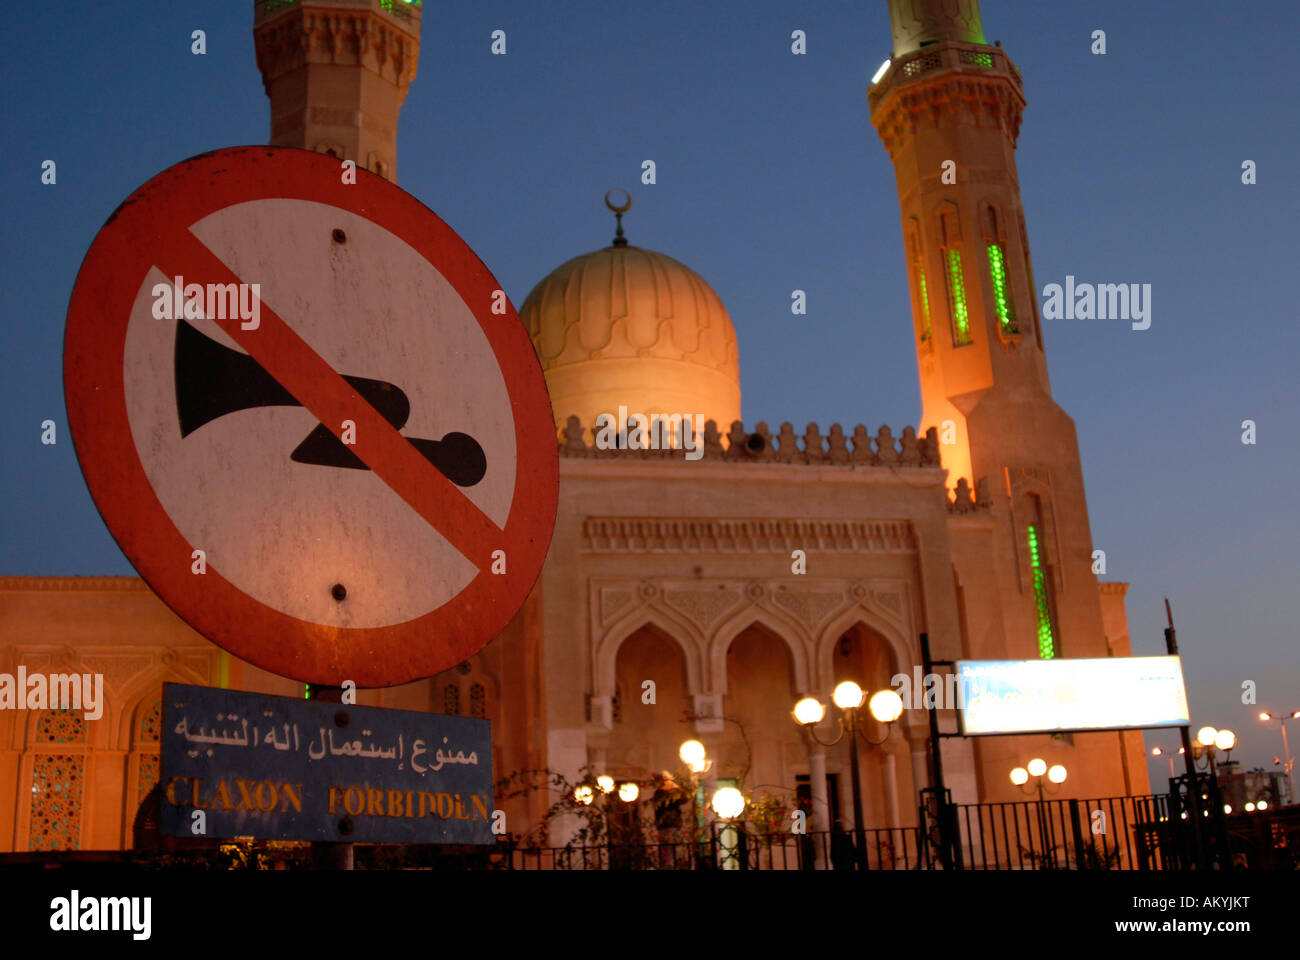 Illuminated mosque in the evening light 'Horns prohibited' Sign, Hurghada, Egypt Stock Photo